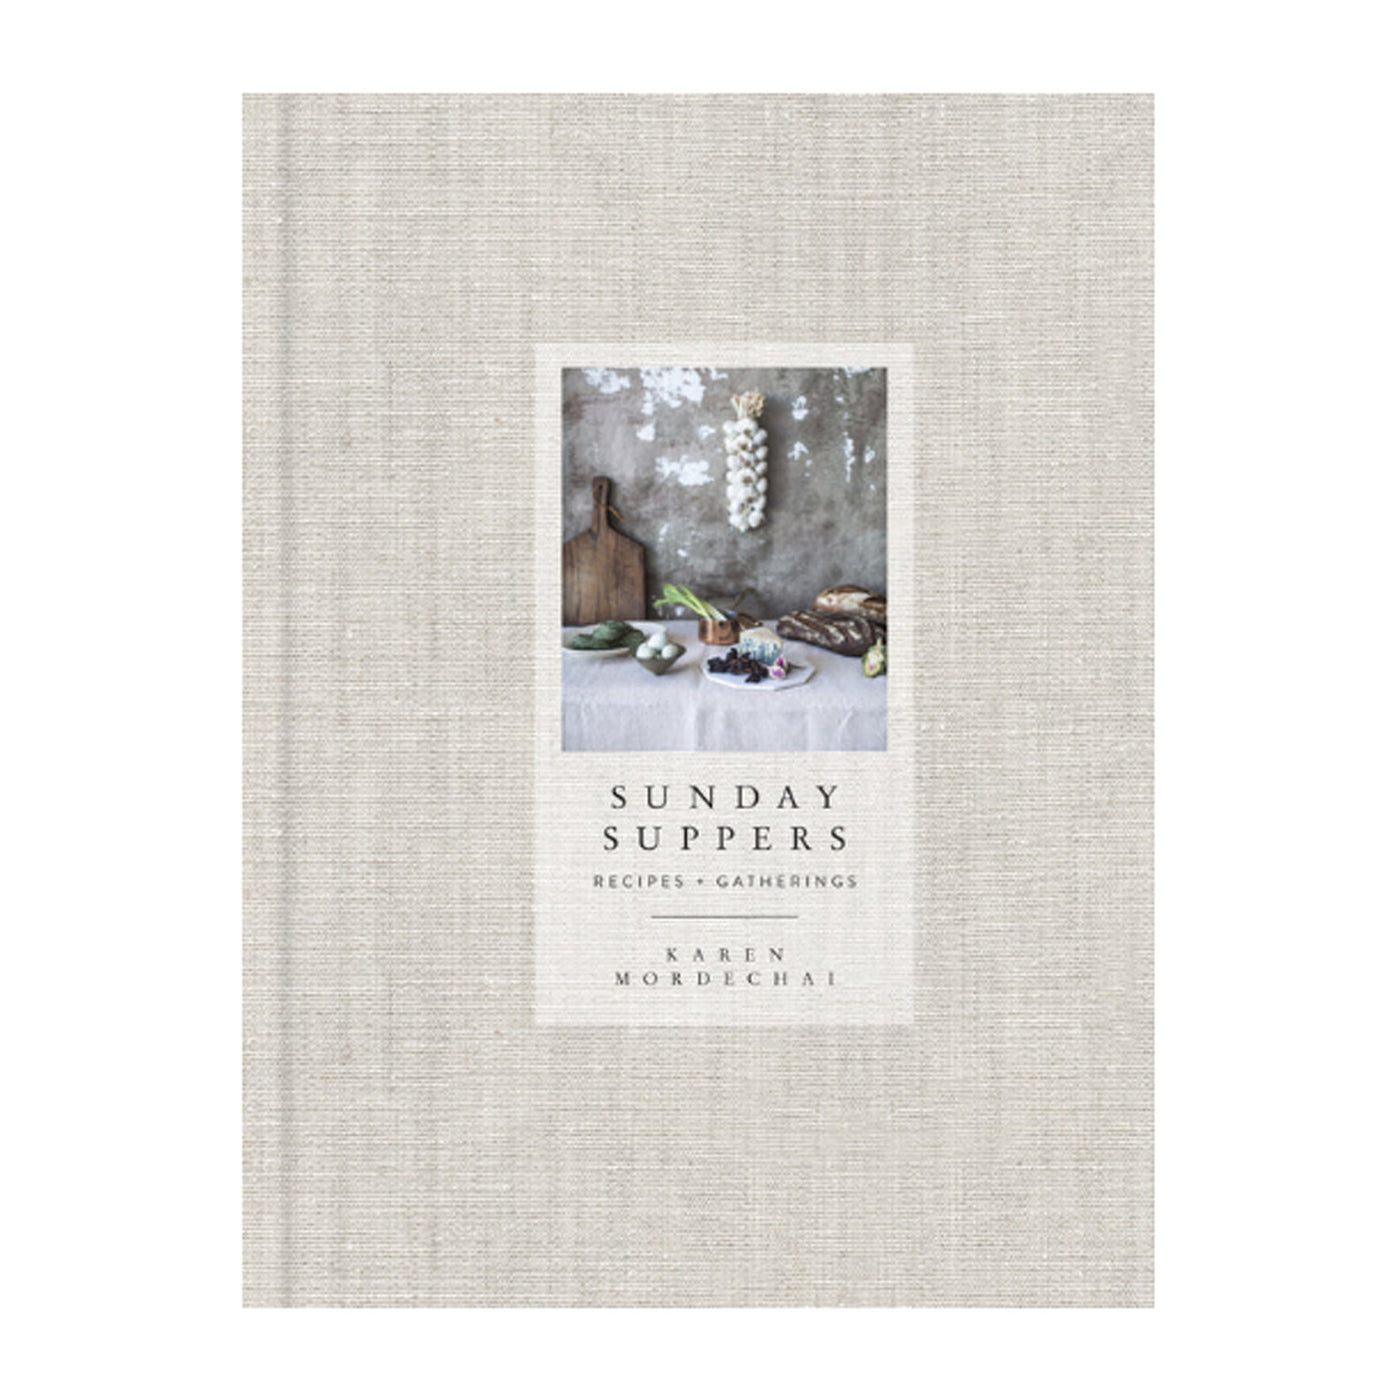 Book titled Sunday Suppers